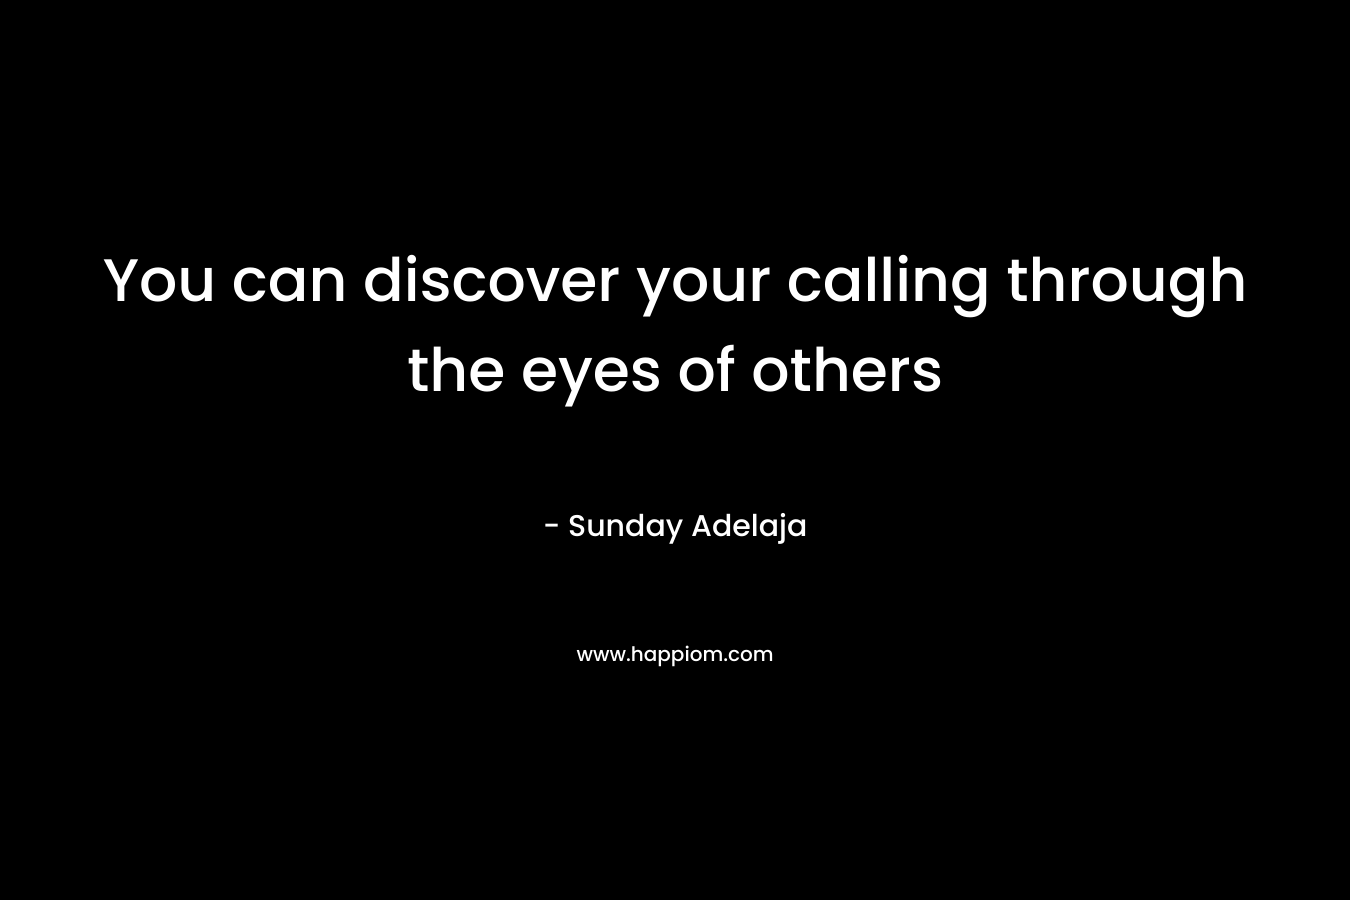 You can discover your calling through the eyes of others